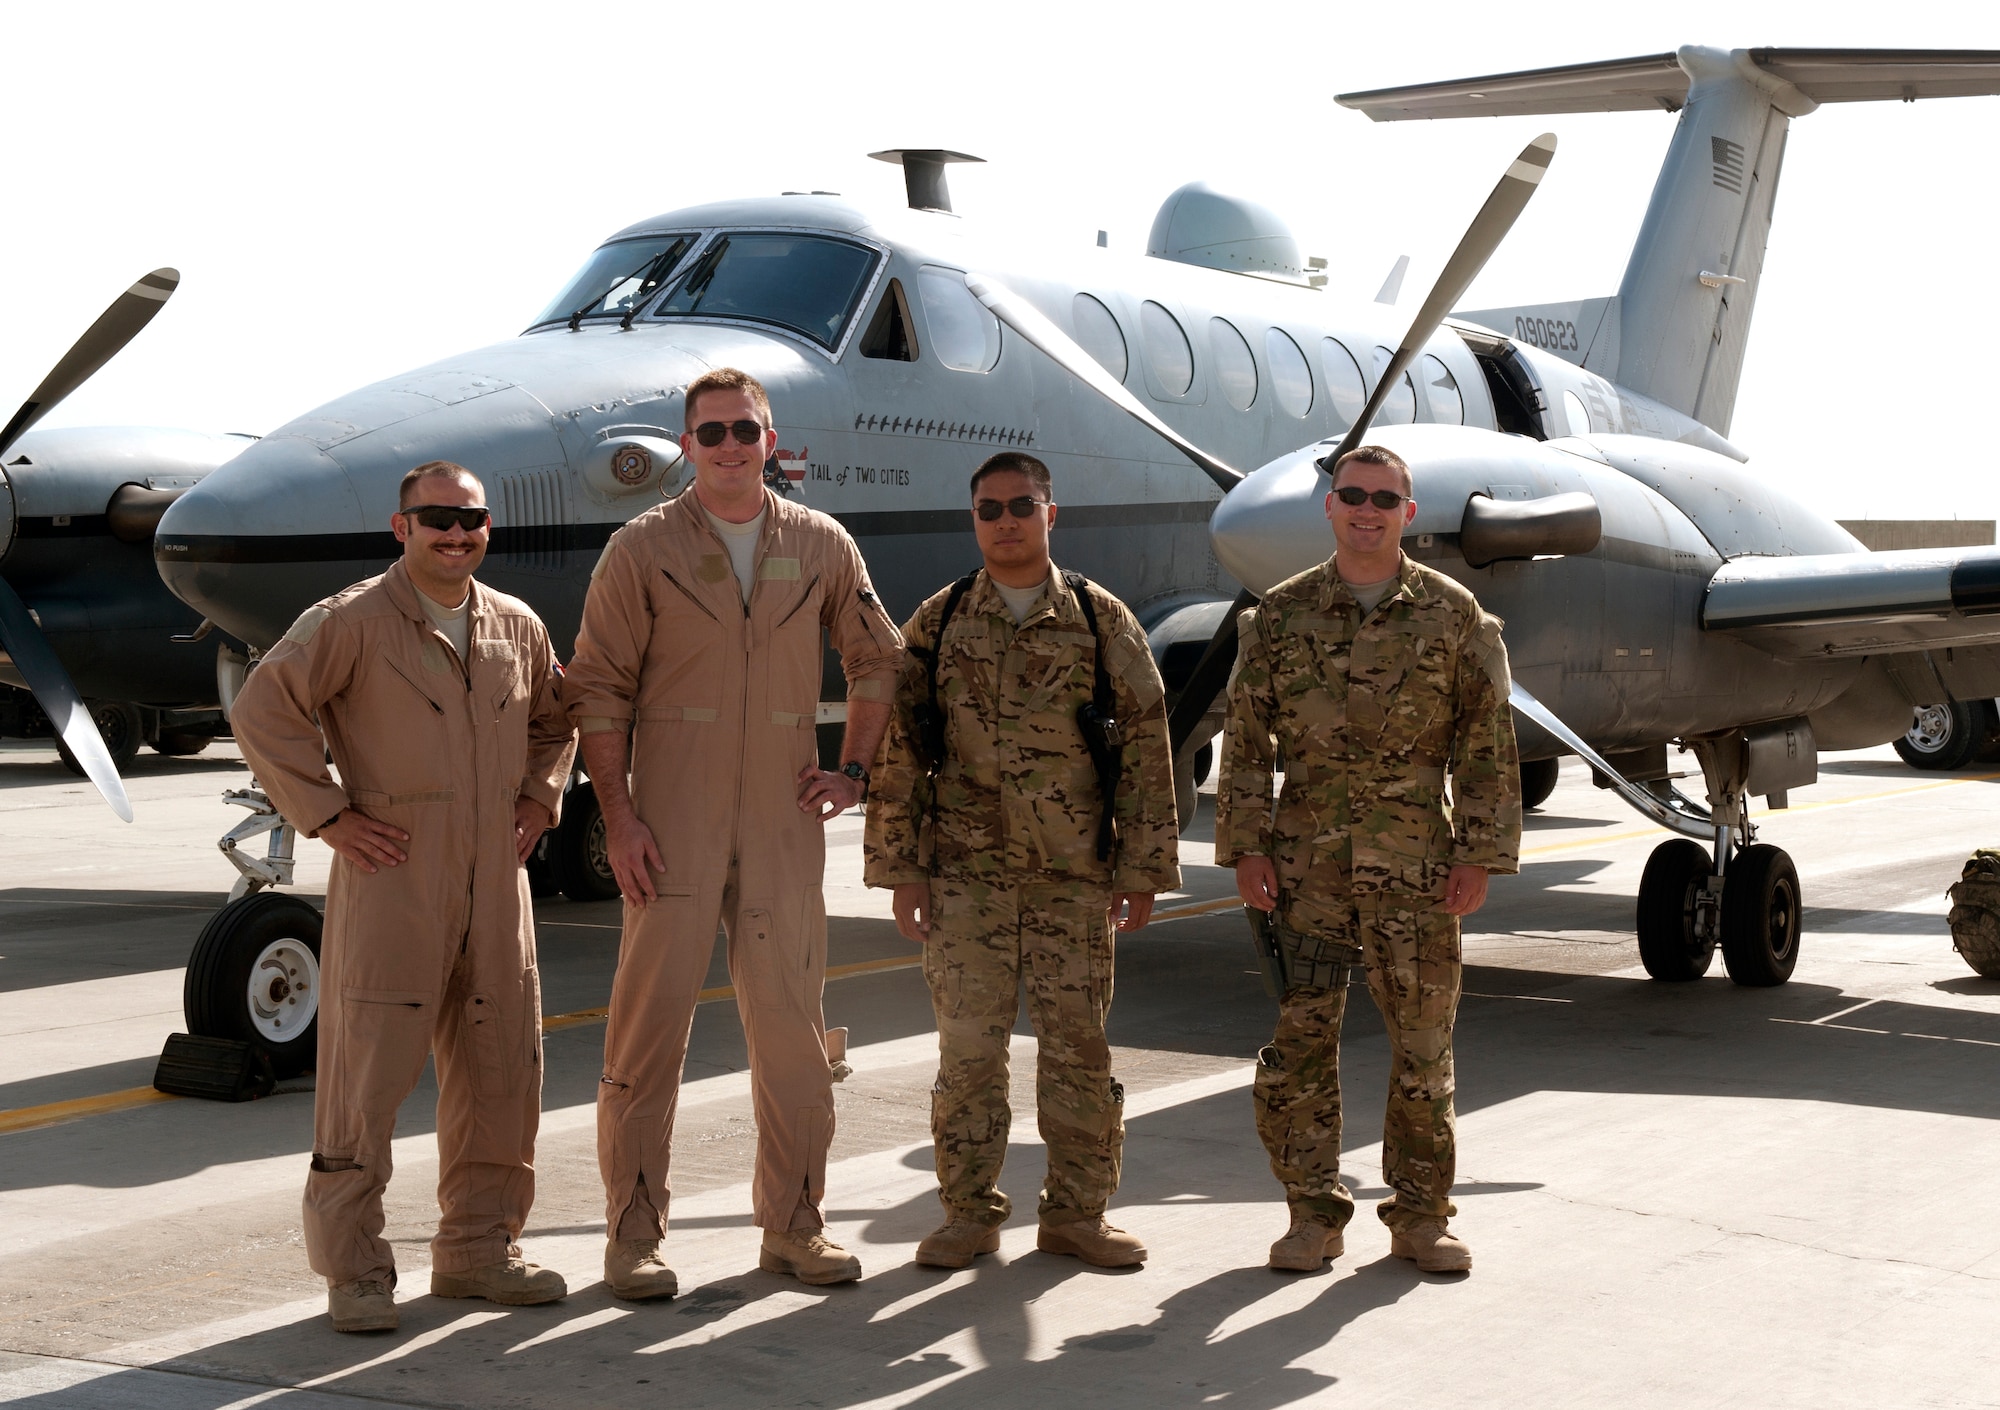 MC-12 Liberty crew members from the 4th Expeditionary Reconnaissance Squadron pause for a photo in front of one of their aircraft at Bagram Airfield, Afghanistan, September 11, 2012. The conclusion of this mission marks a milestone, as it signifies the 4 ERS officially exceeding over 100,000 flying hours using the MC-12s since the unit was stood up in Dec. 2009. 100,000 flying hours roughly equates to 11 and a-half years of flying for one the aircraft. 4 ERS leadership can say they accomplished this feat in under three years using its fleet of MC-12s. (U.S. Air Force photo/1st Lt. Marlene Solano)